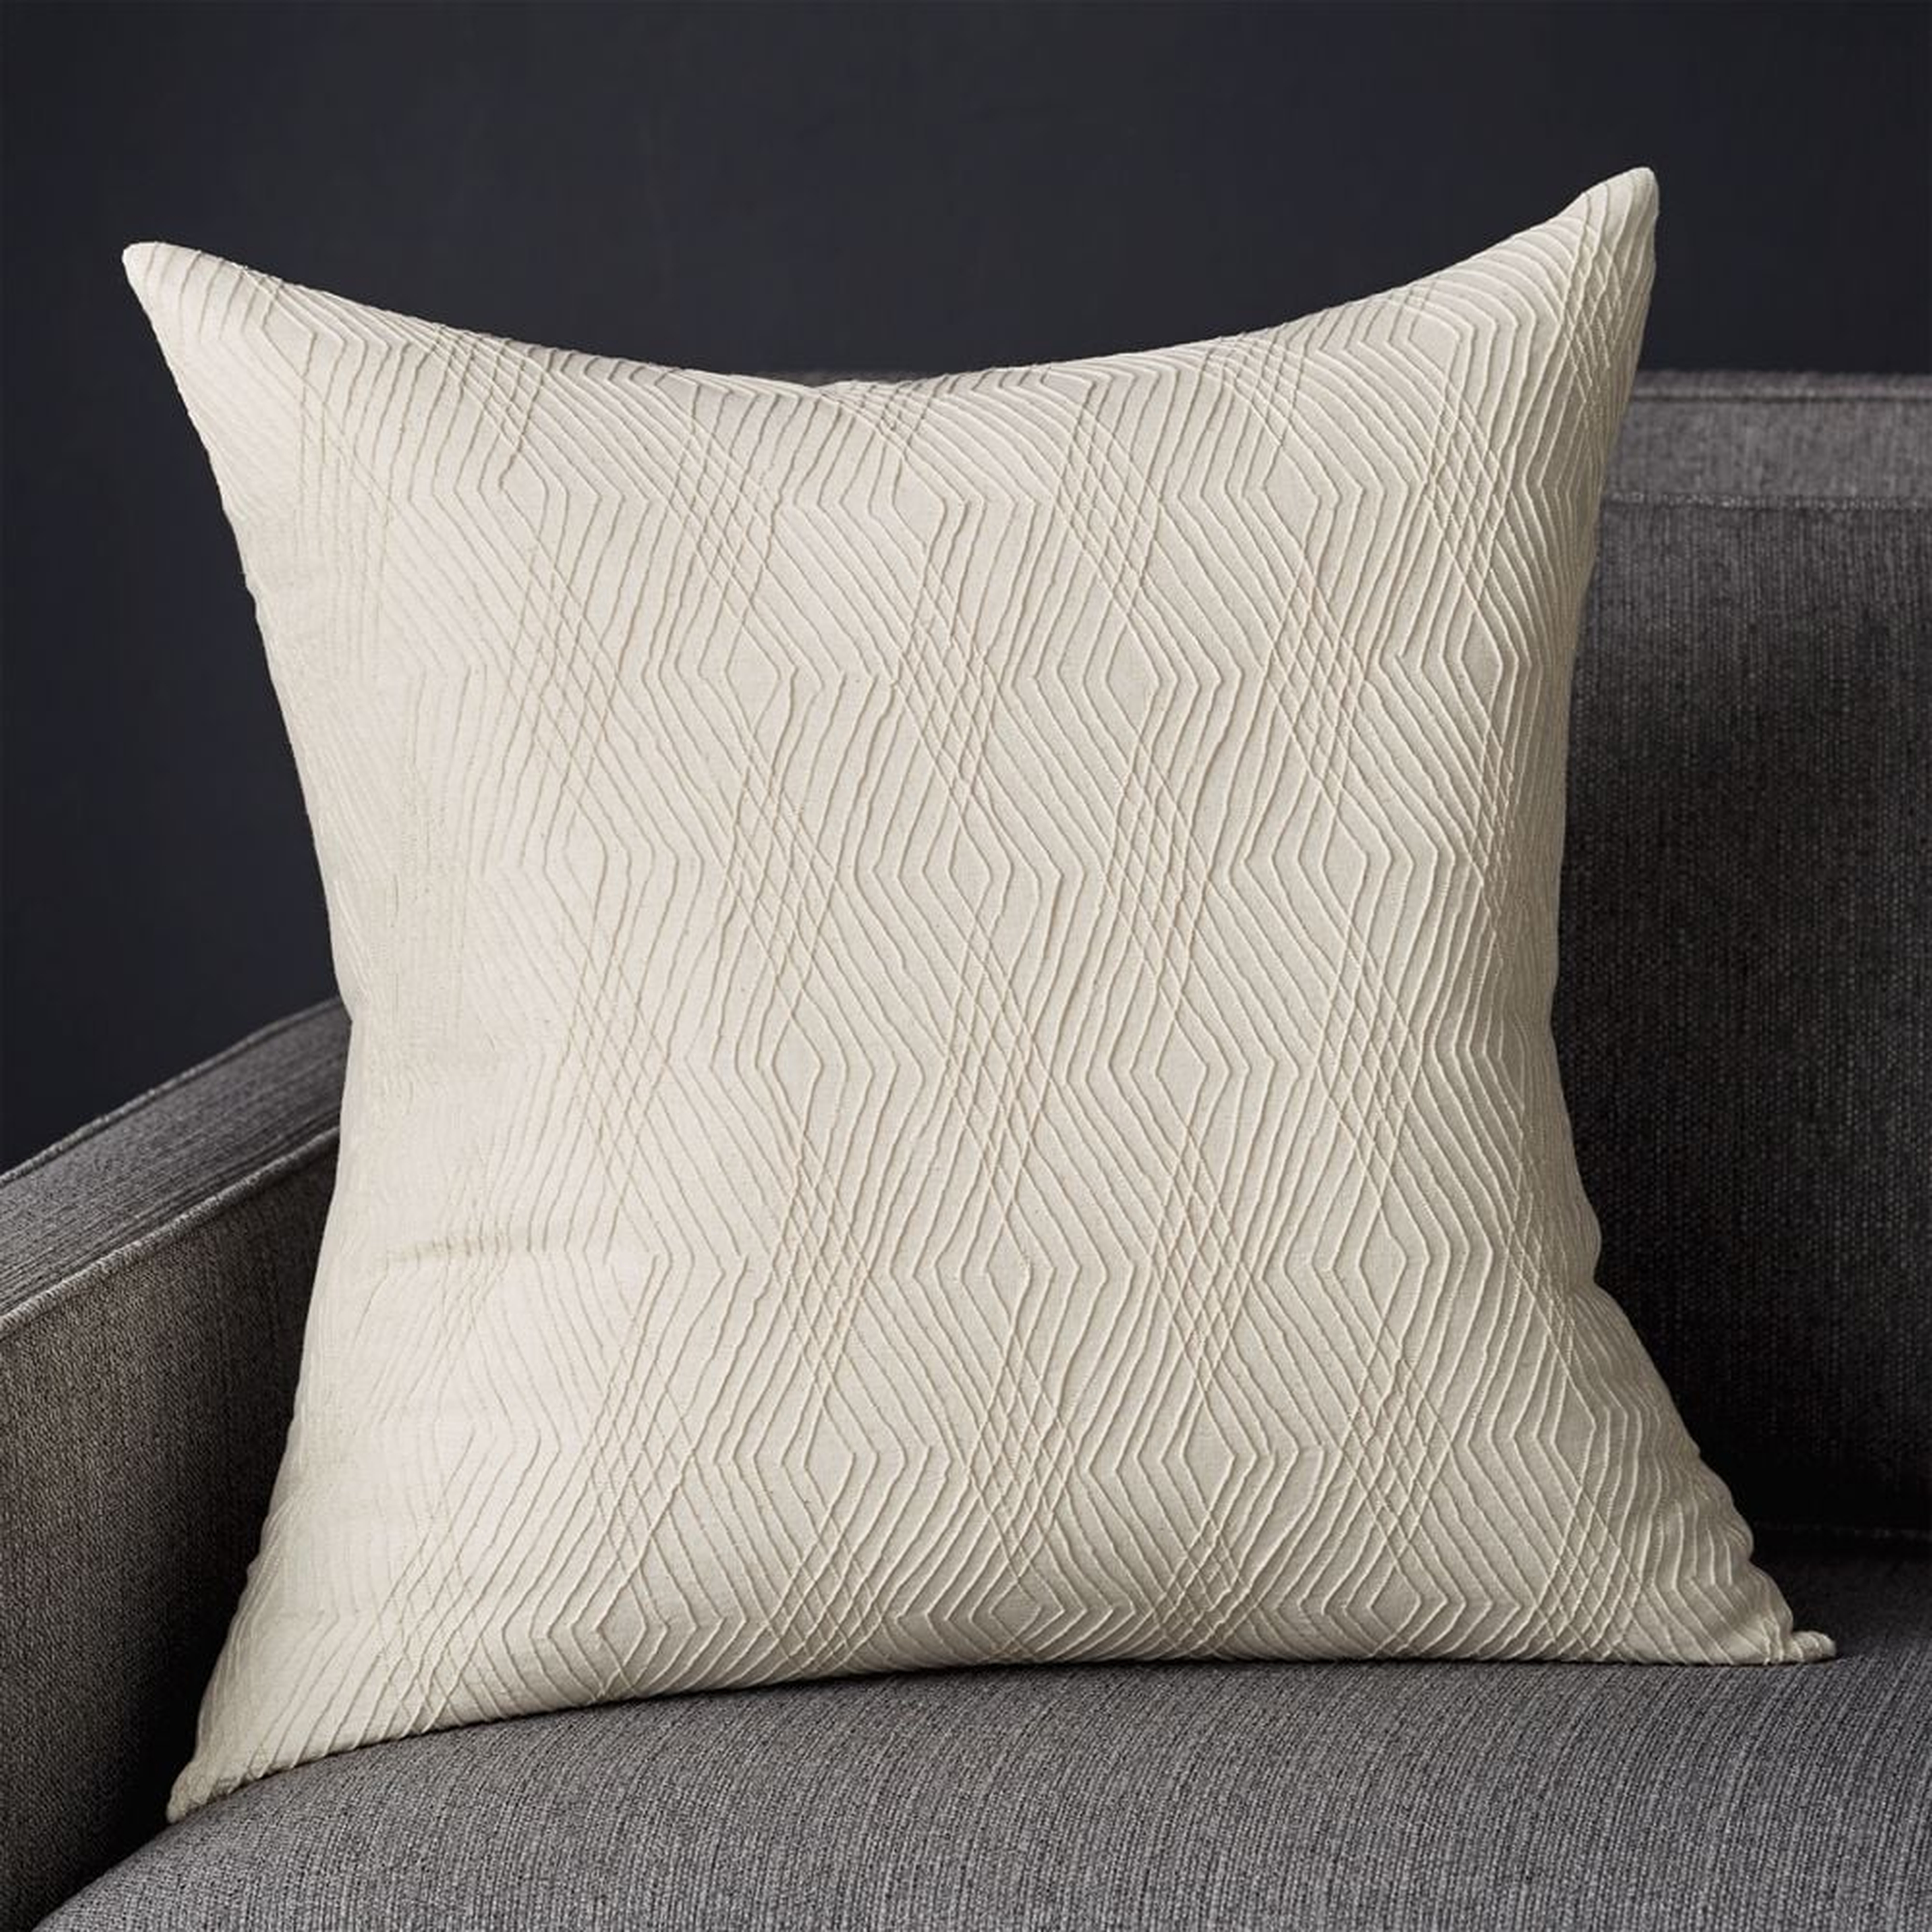 Arley Geometric Pillow with Feather-Down Insert 20" - Crate and Barrel